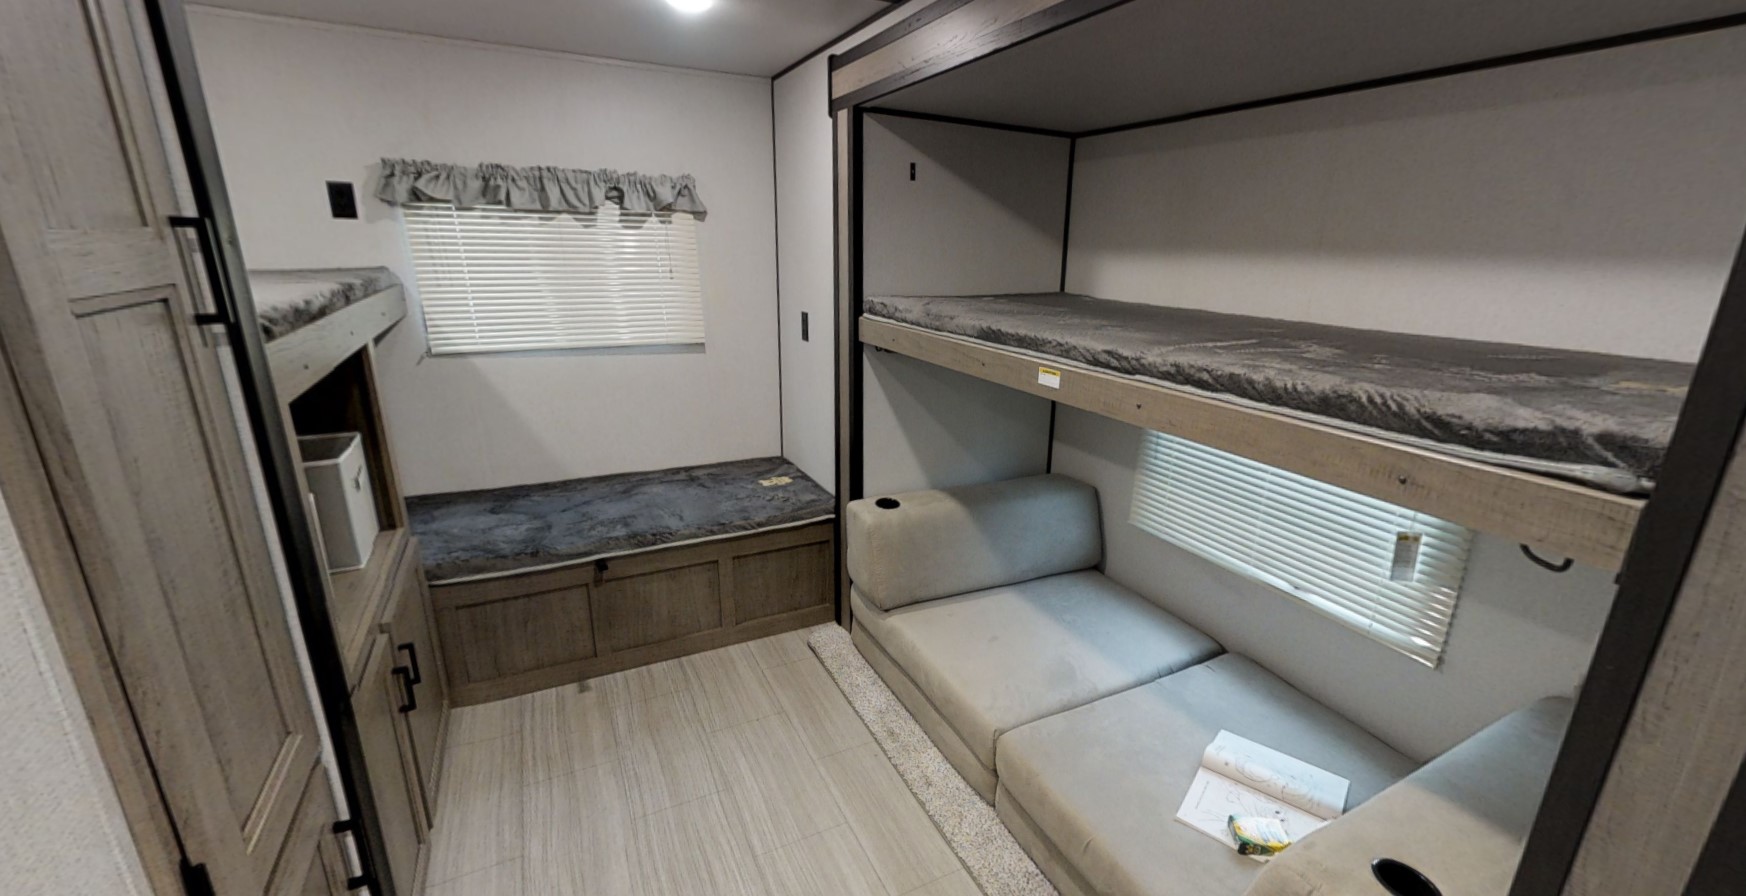 bunkhouse travel trailer with slide out